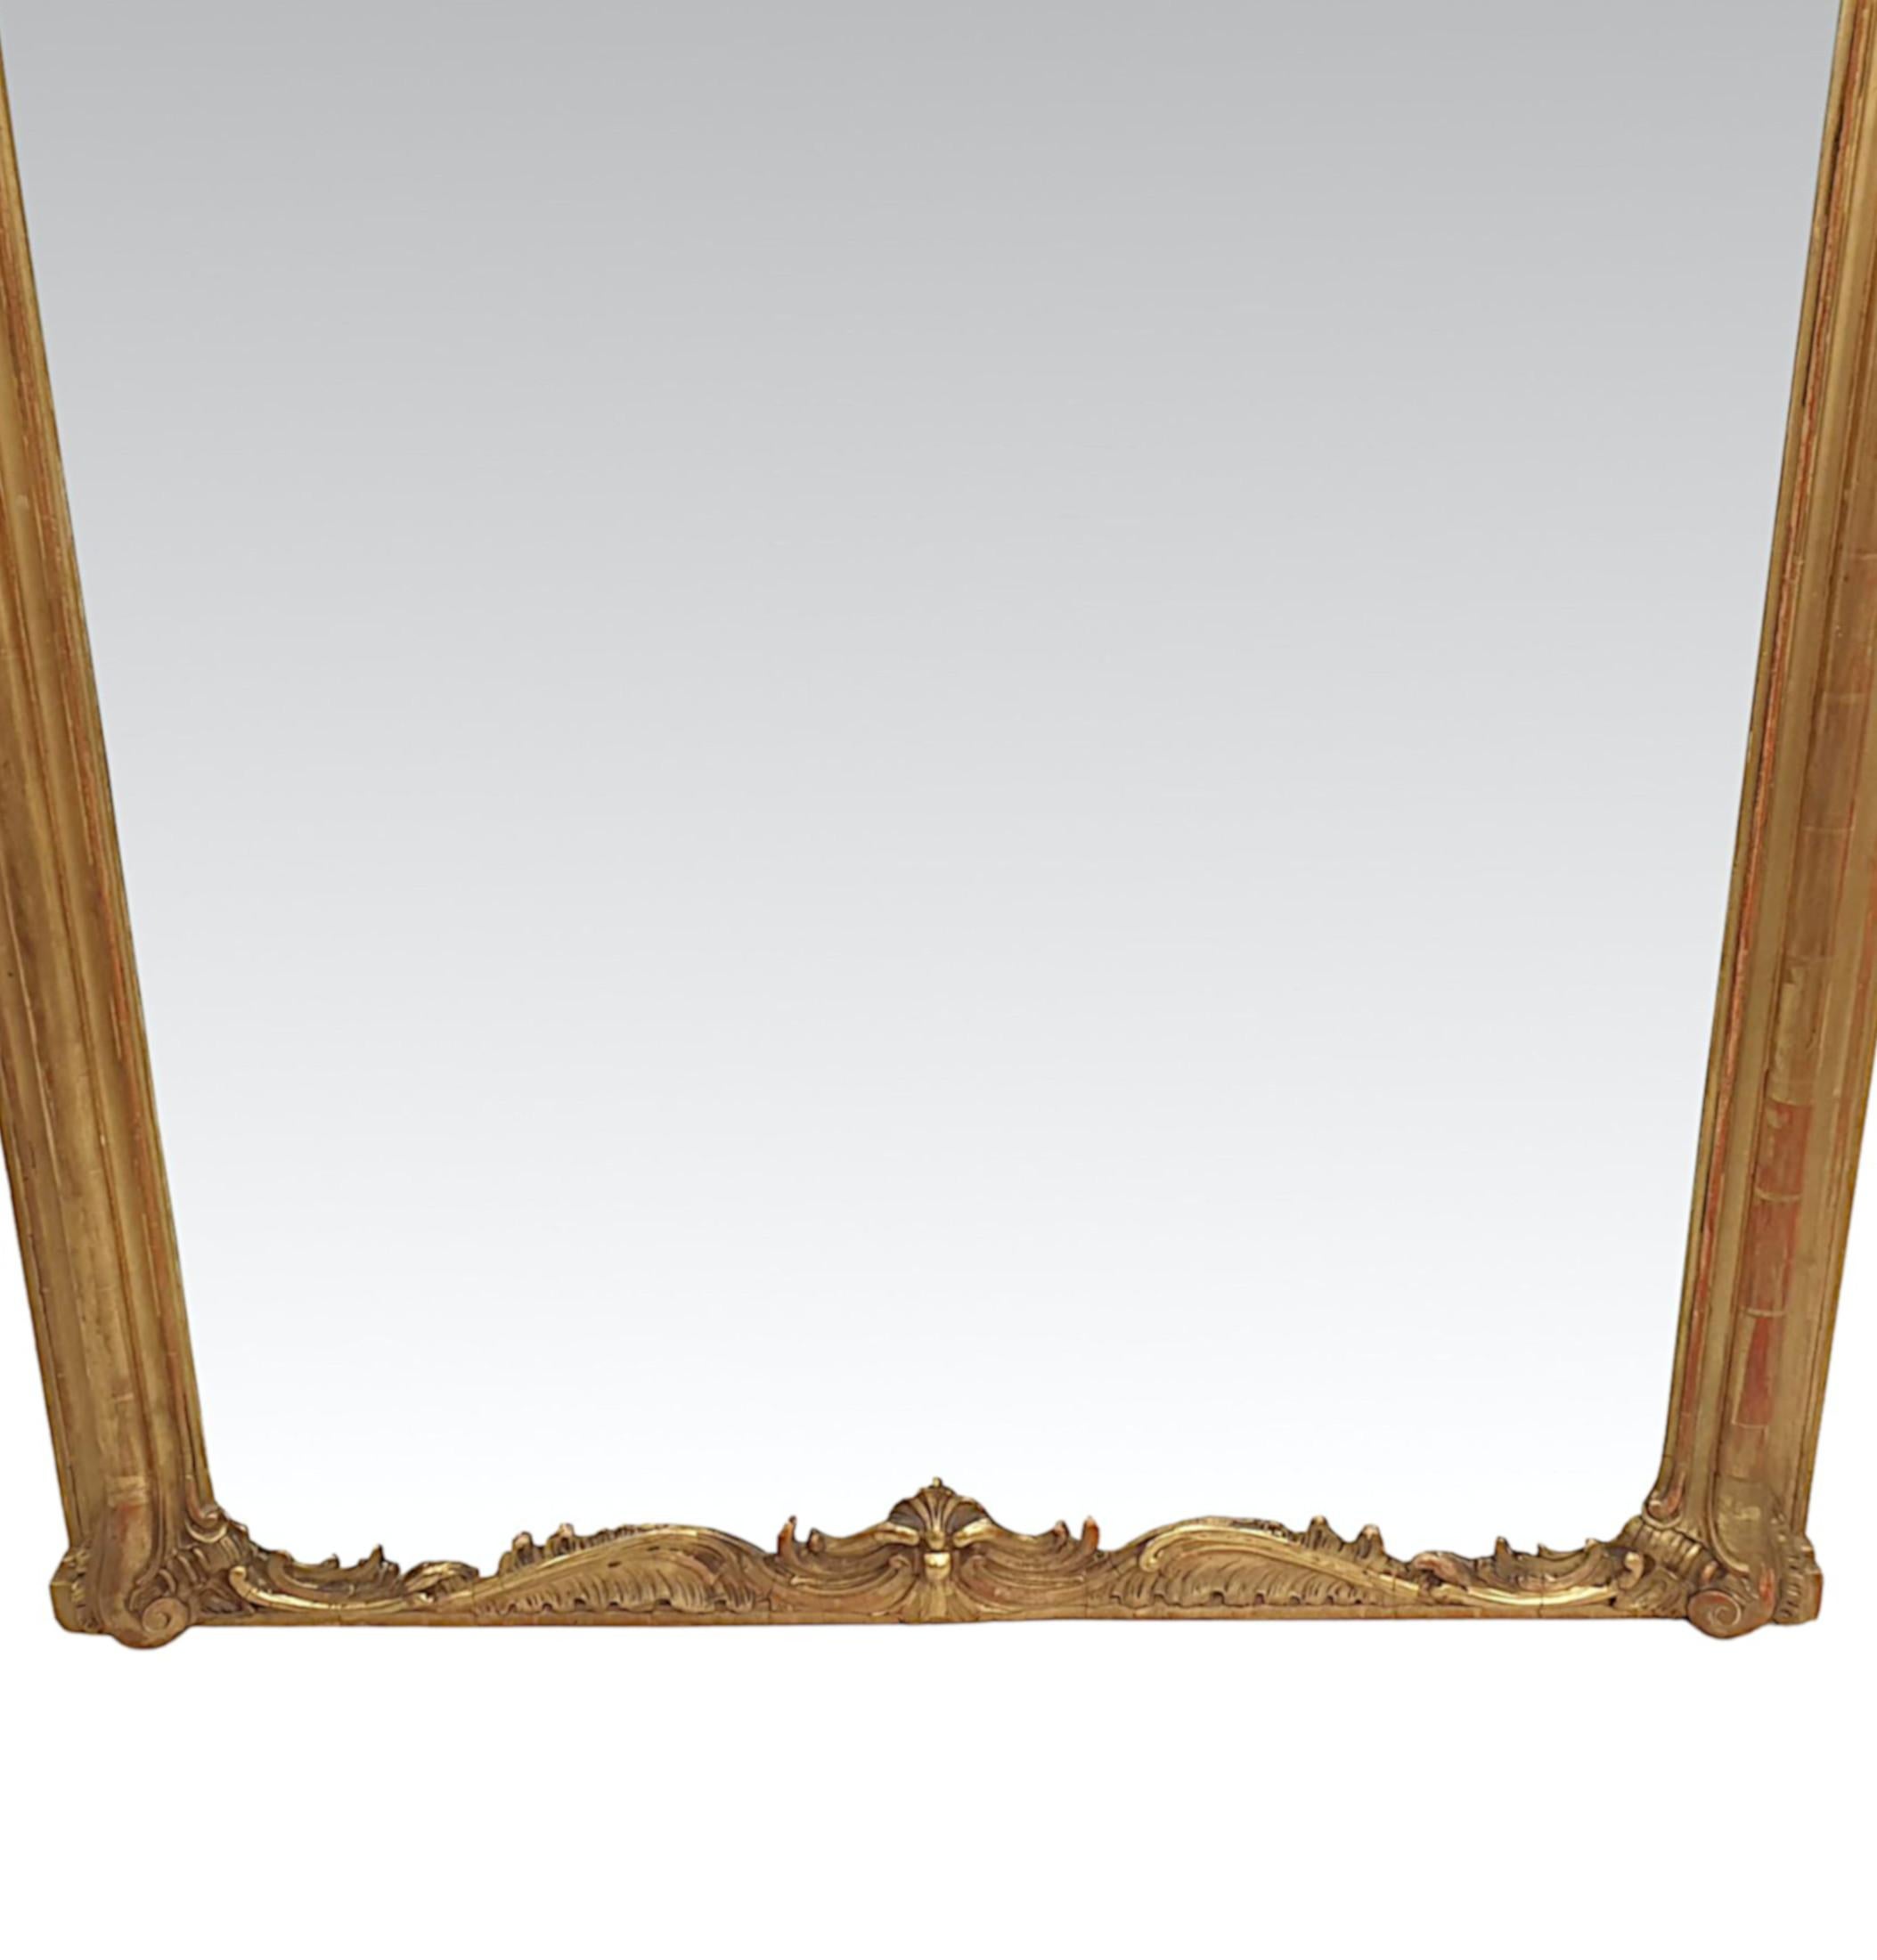 Glass A Fabulous 19th Century Large Giltwood Hall or Overmantel Mirror For Sale